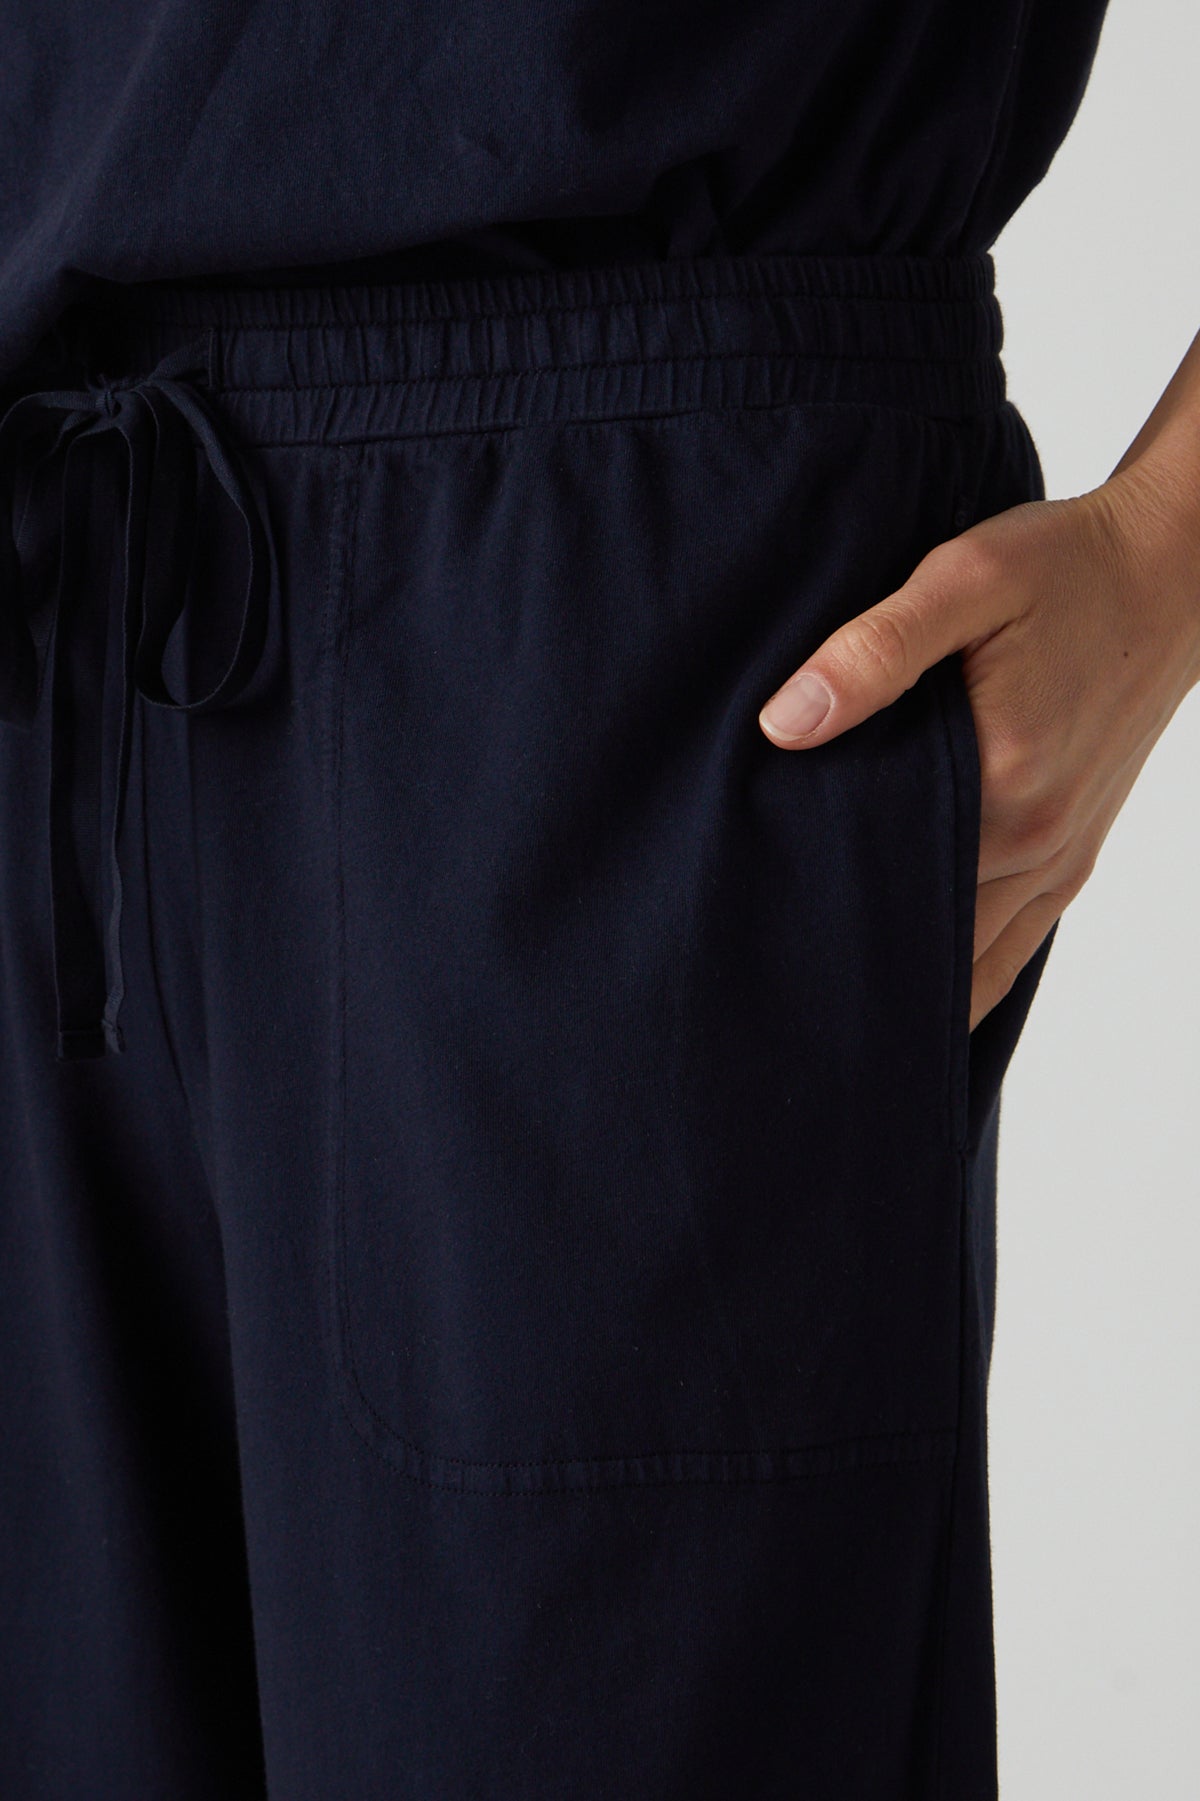 Pismo Pant in navy front pocket detail-25156539056321